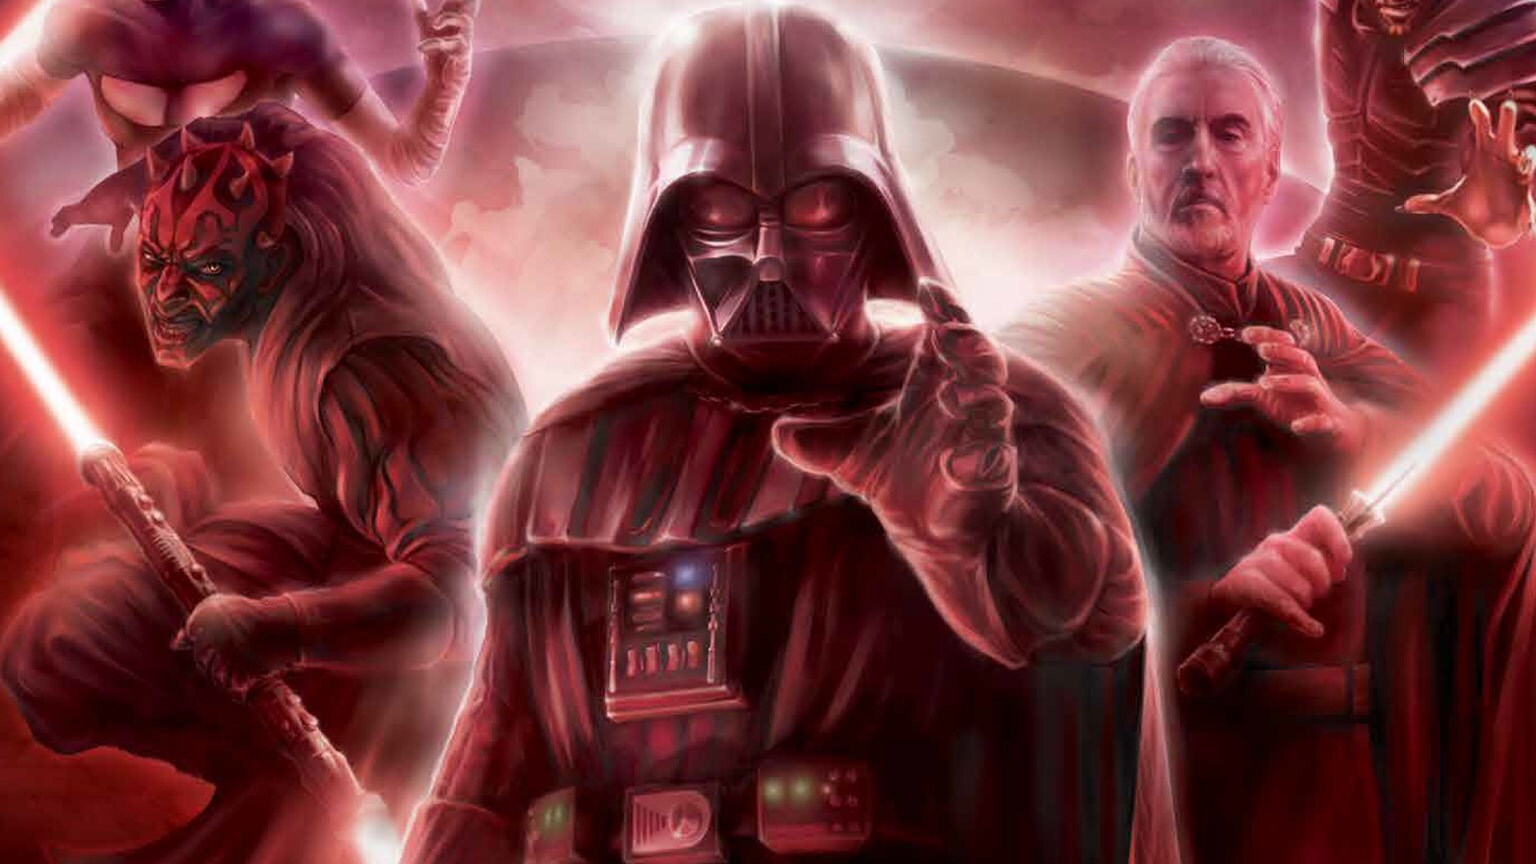 Uncover Mysteries of the Dark Side in The Secrets of the Sith - Exclusive Reveal